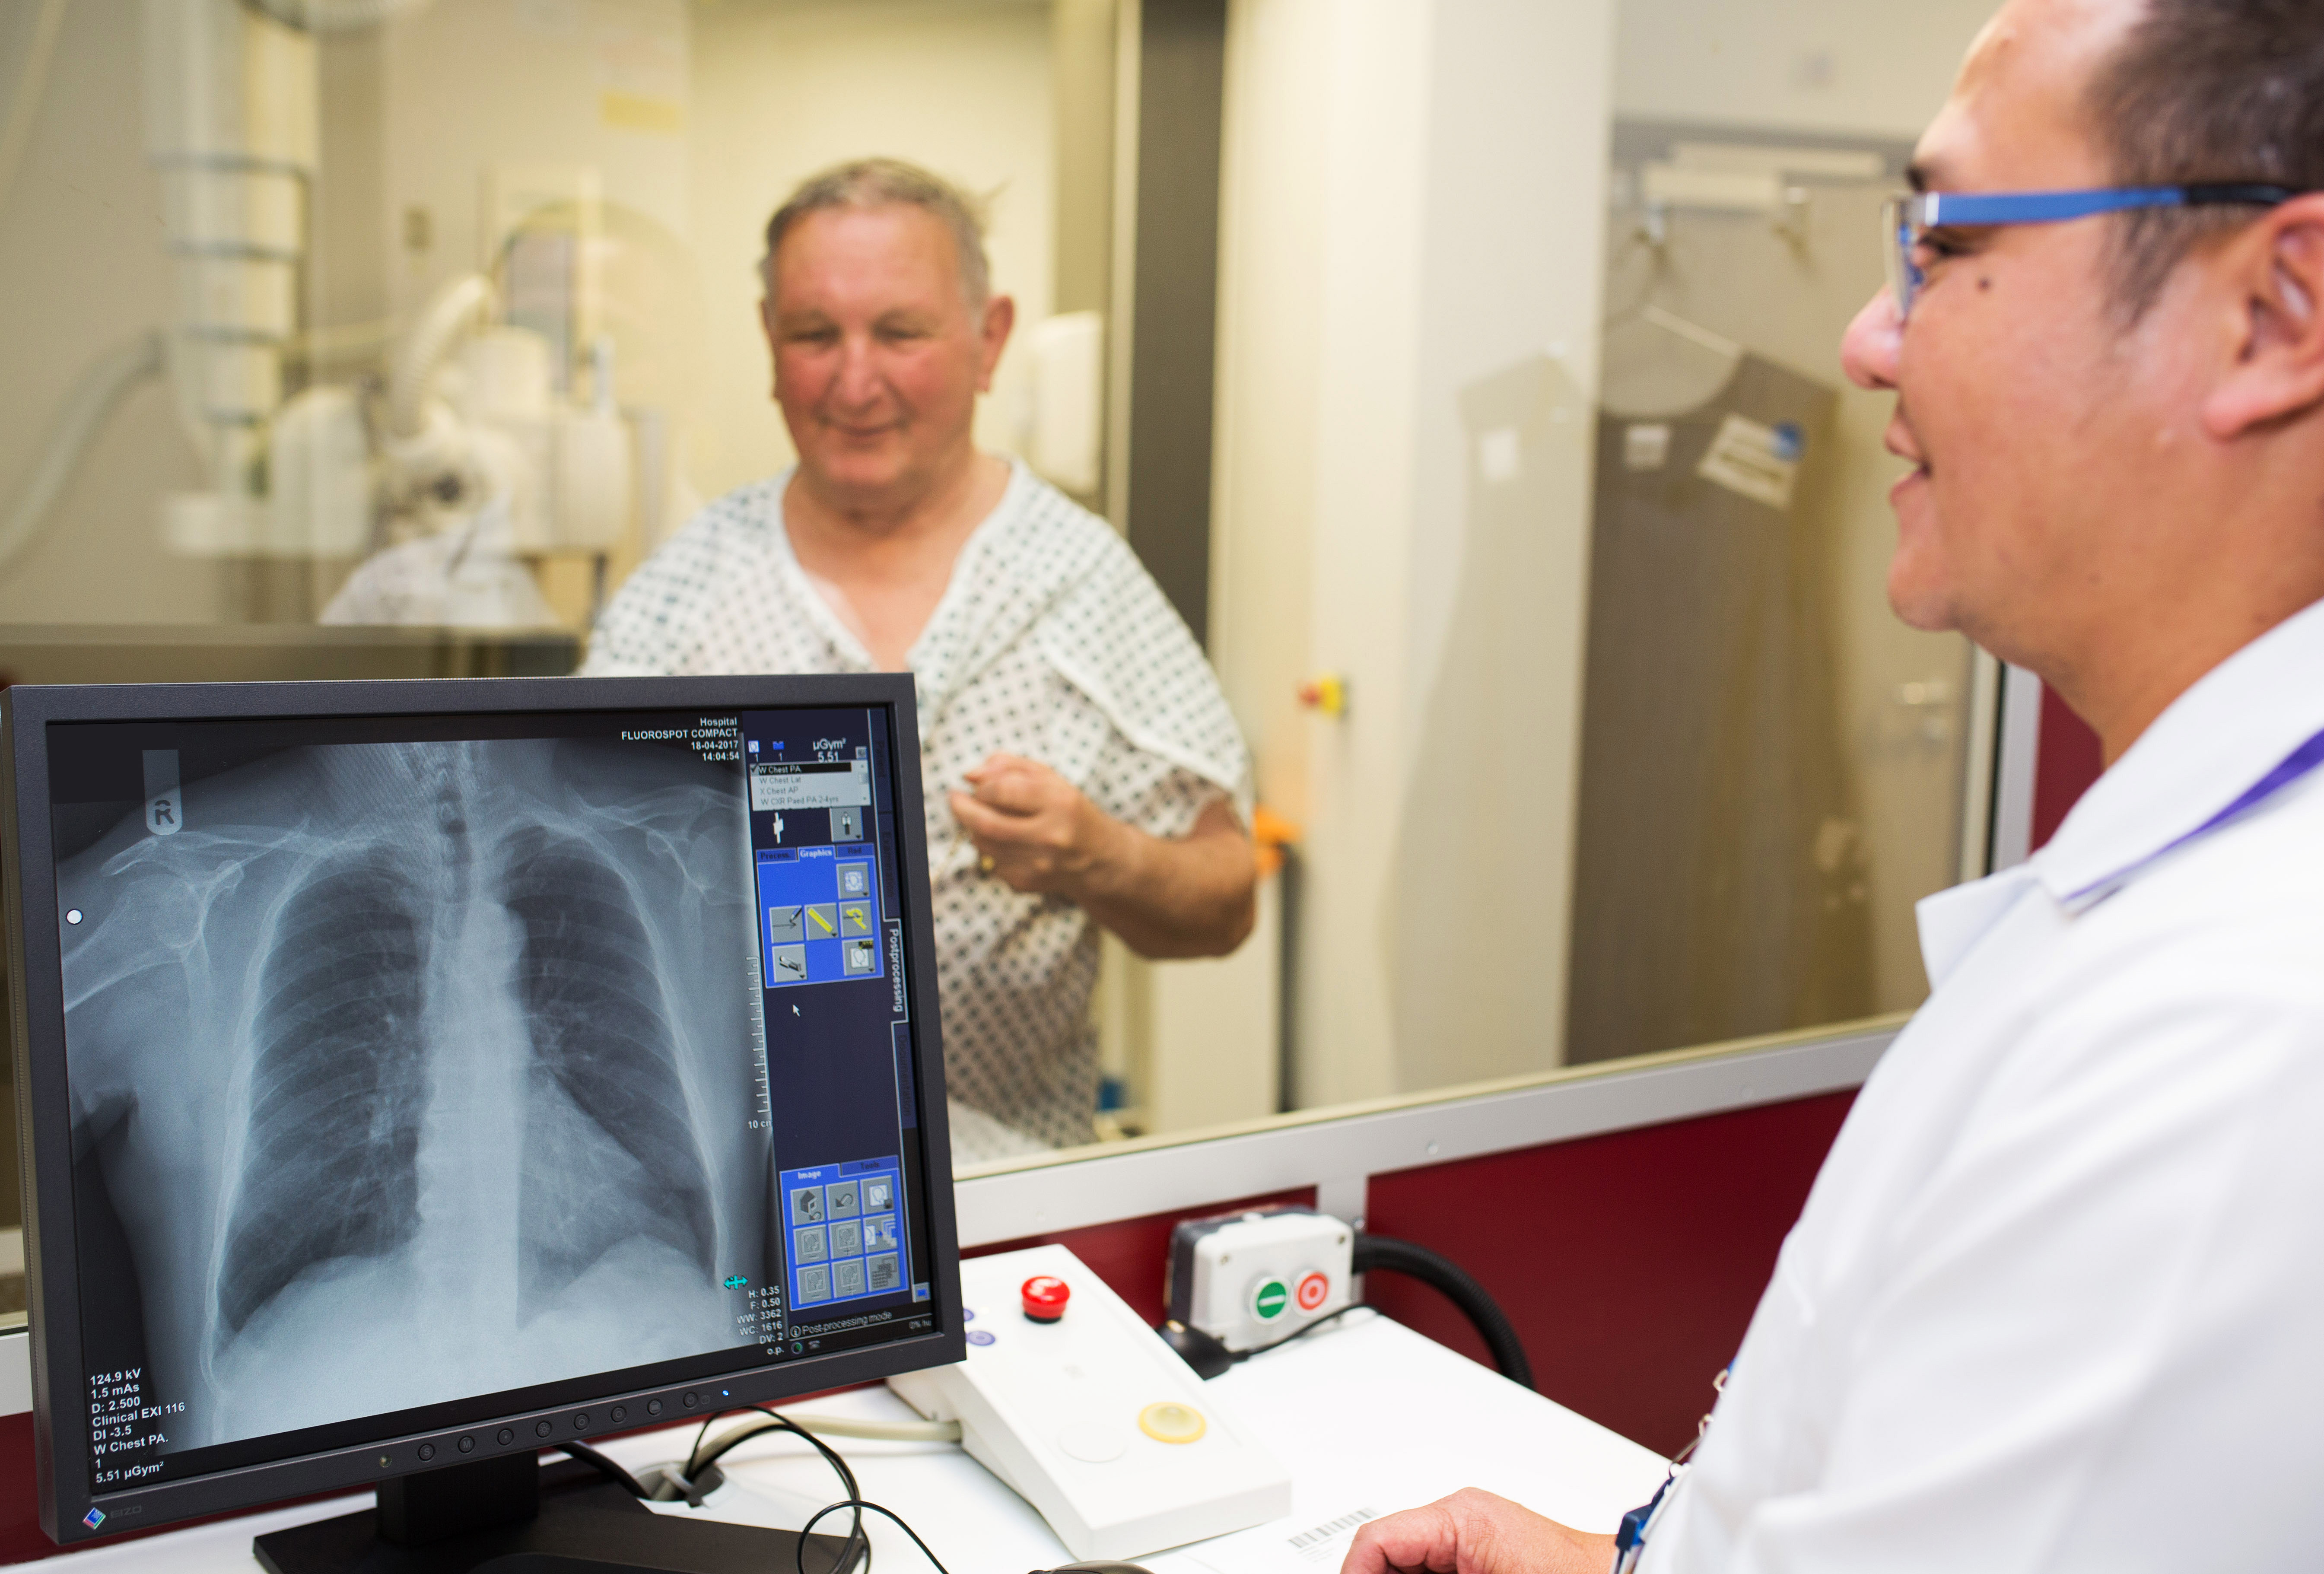 Man having xray, the the foreground you can see the s-ray technician and a picture of the person's chest x-ray